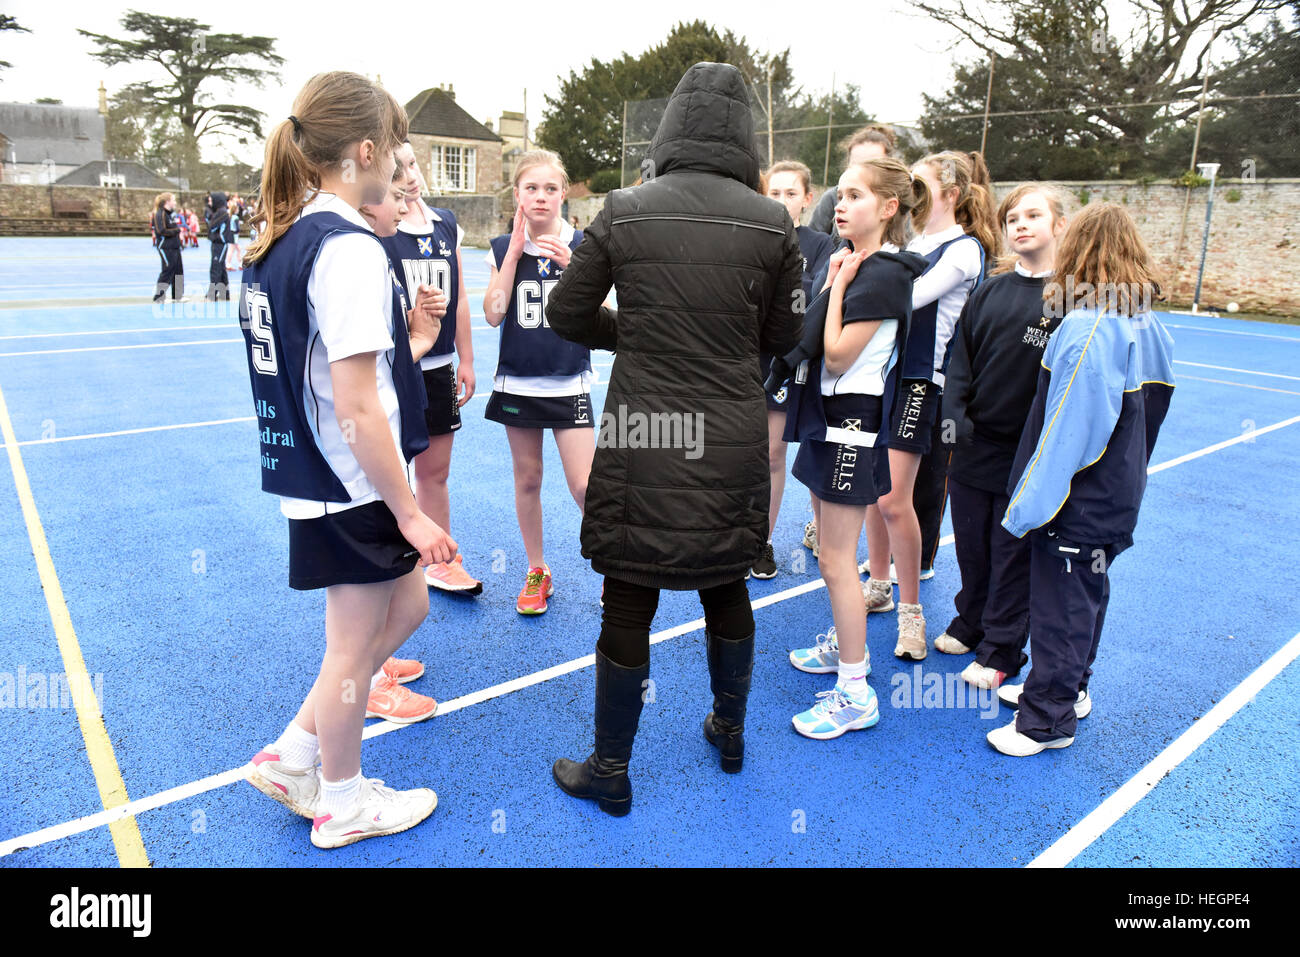 Choristers from Wells Cathedral Choir play in inter-chorister netball tournament, Wells, Somerset, UK. Stock Photo